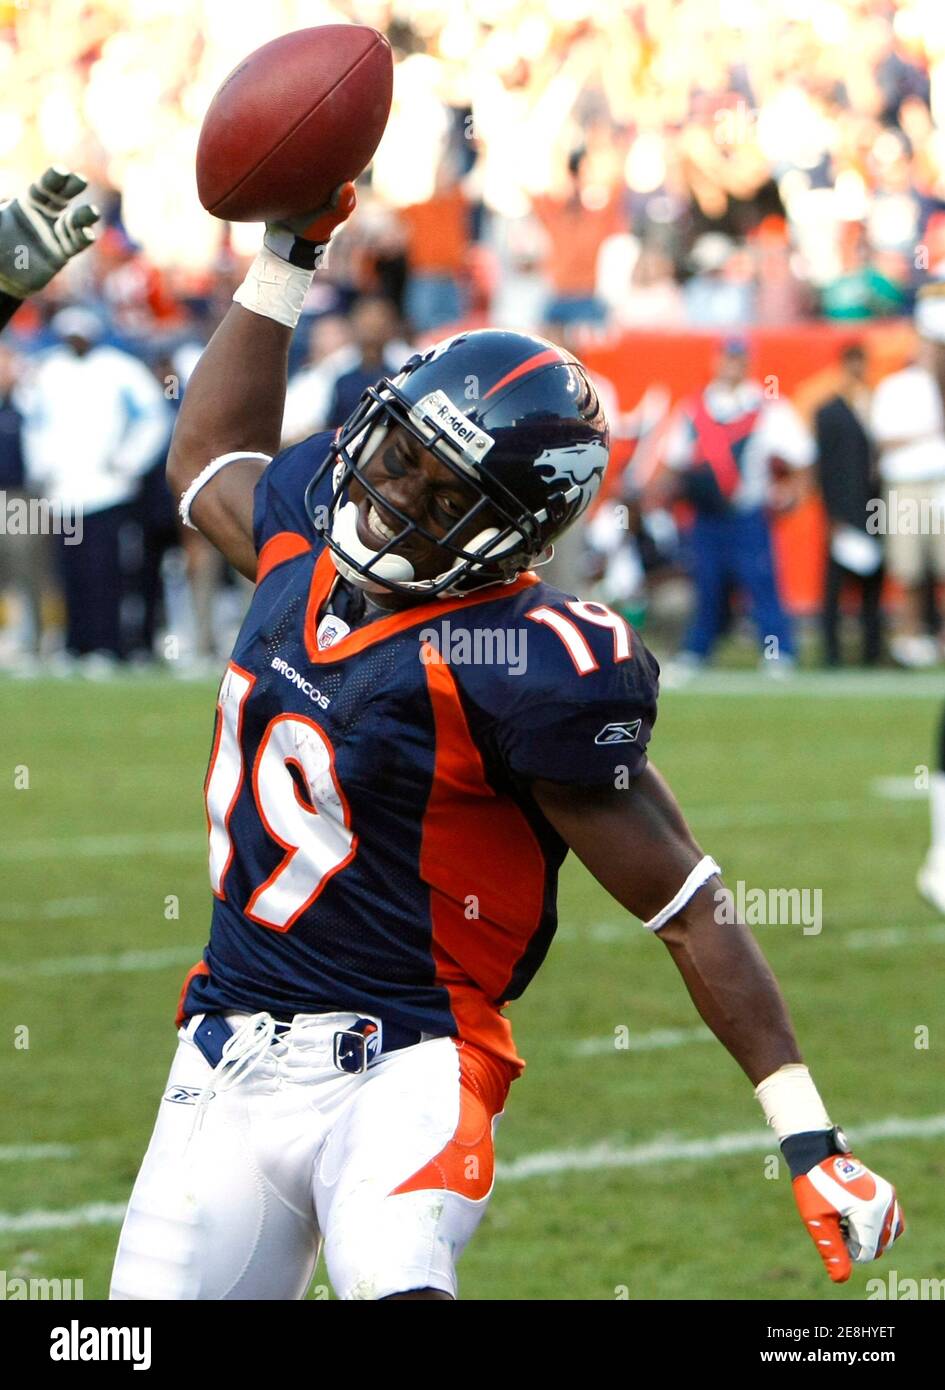 Denver Broncos wide receiver Eddie Royal celebrates catching a pass in the endzone for a touchdown against the San Diego Chargers late in the fourth quarter during their NFL football game in Denver September 14, 2008. Royal went on to catch a two-point conversion on the next play to win the game. REUTERS/Rick Wilking (UNITED STATES) Stock Photo